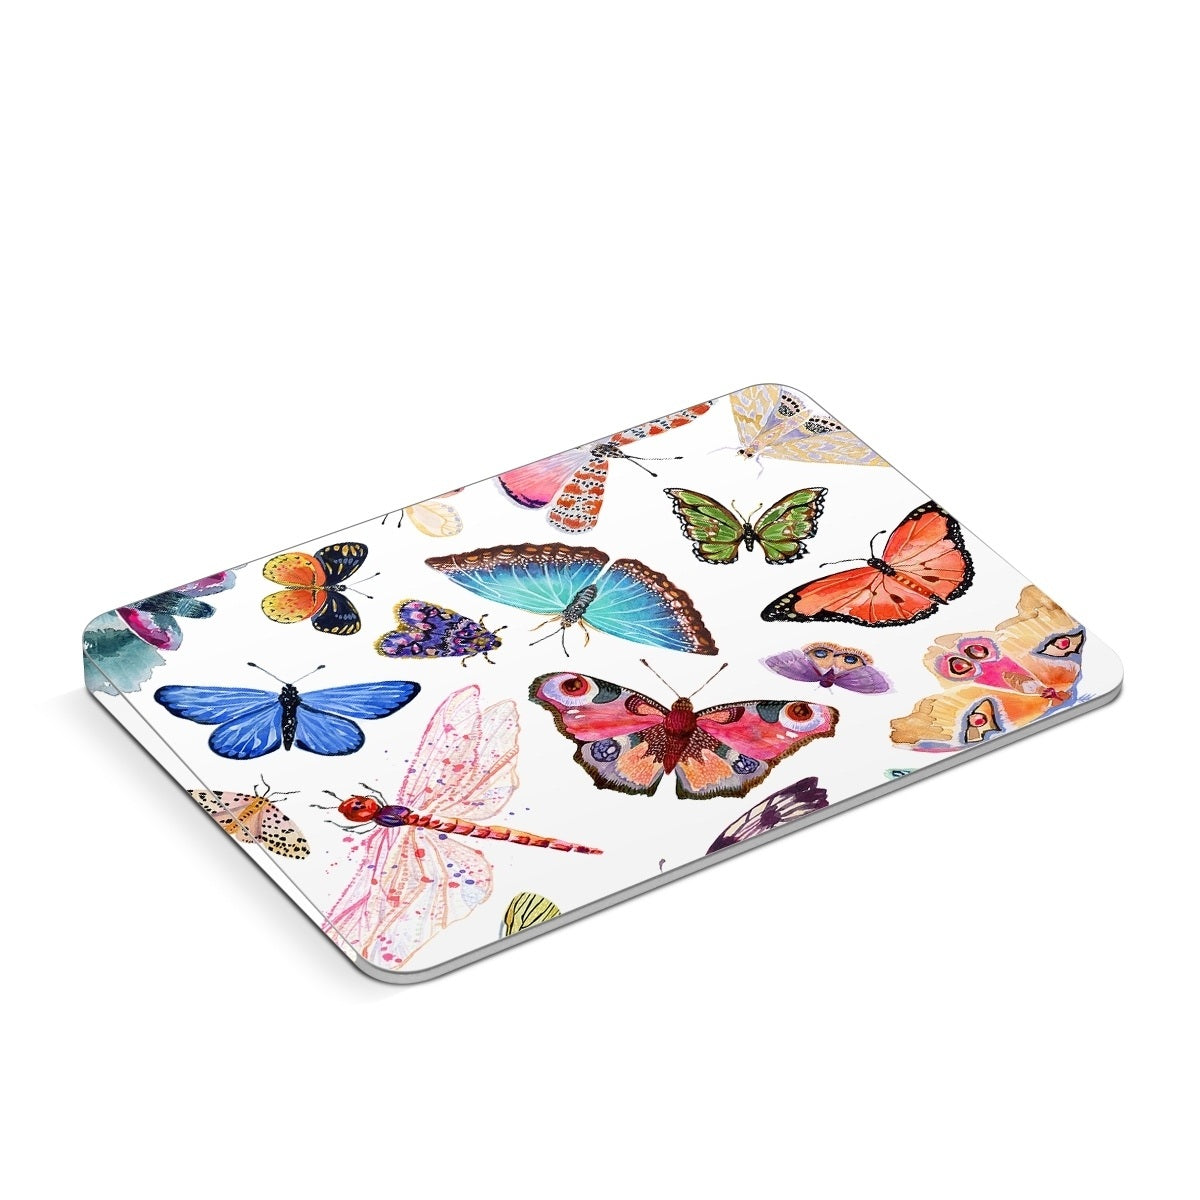 Butterfly Scatter - Apple Magic Trackpad Skin